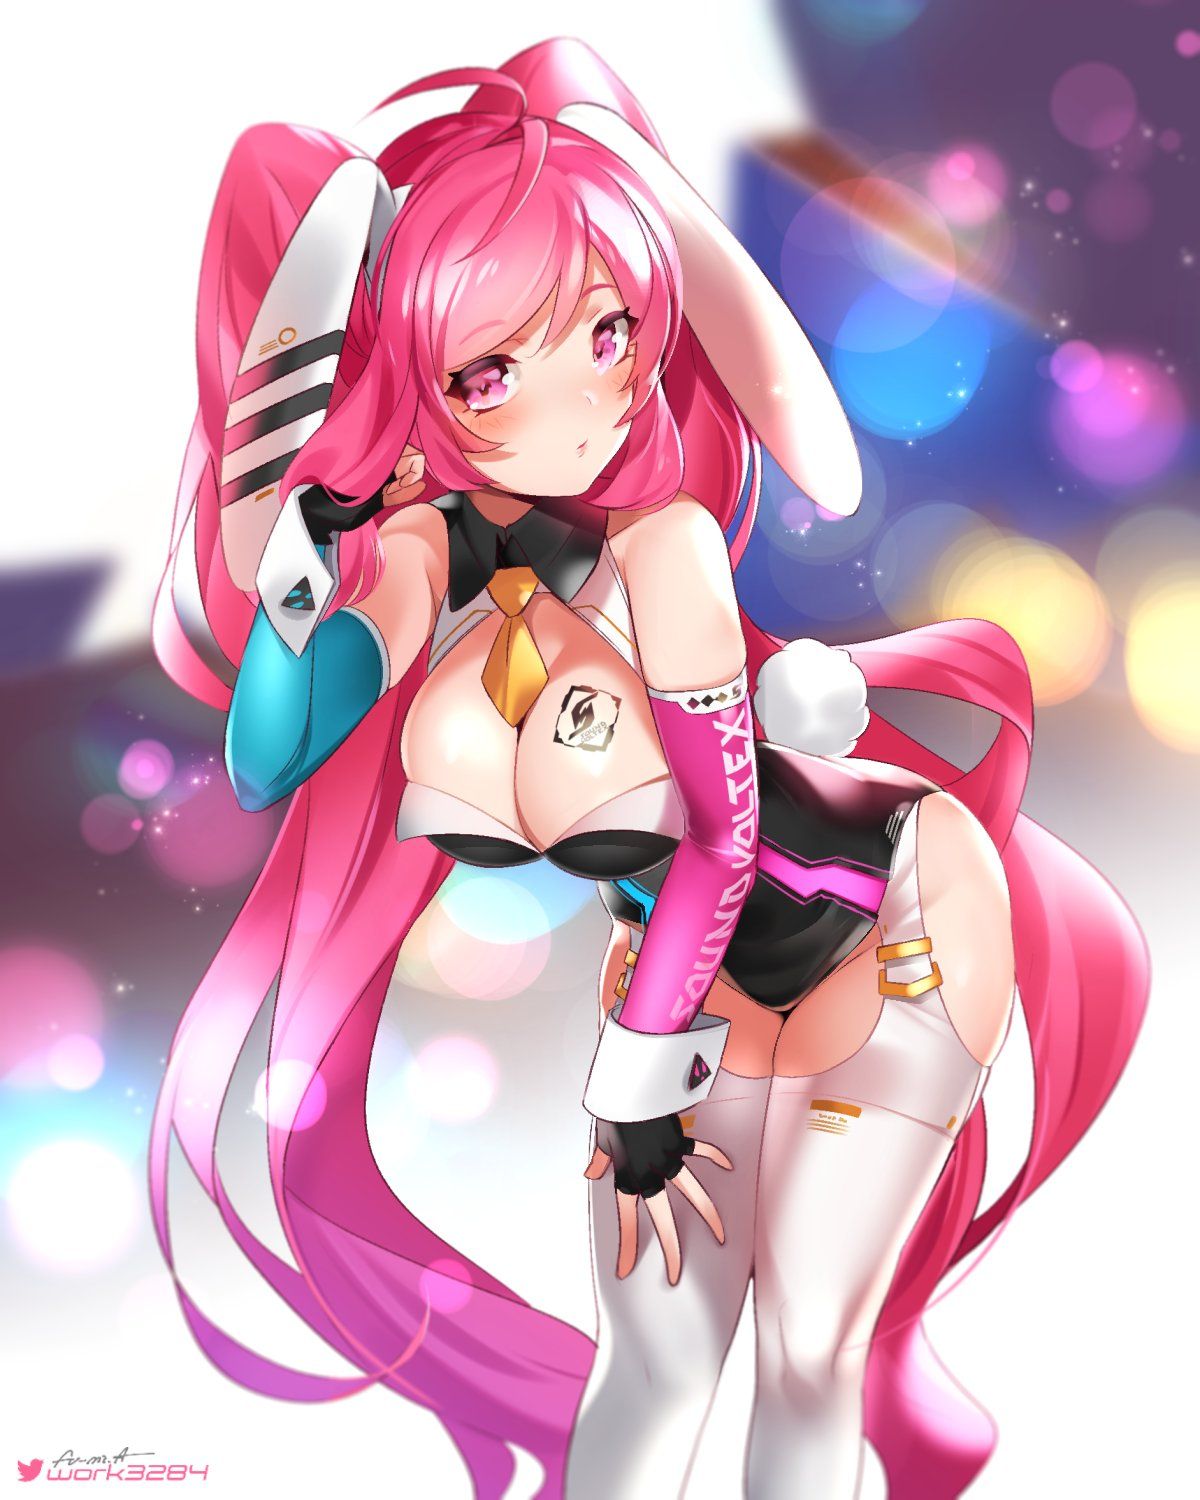 [2nd] Sexy Bunny Girl Pretty Second Erotic Image Part 38 [Bunny Girl] 10